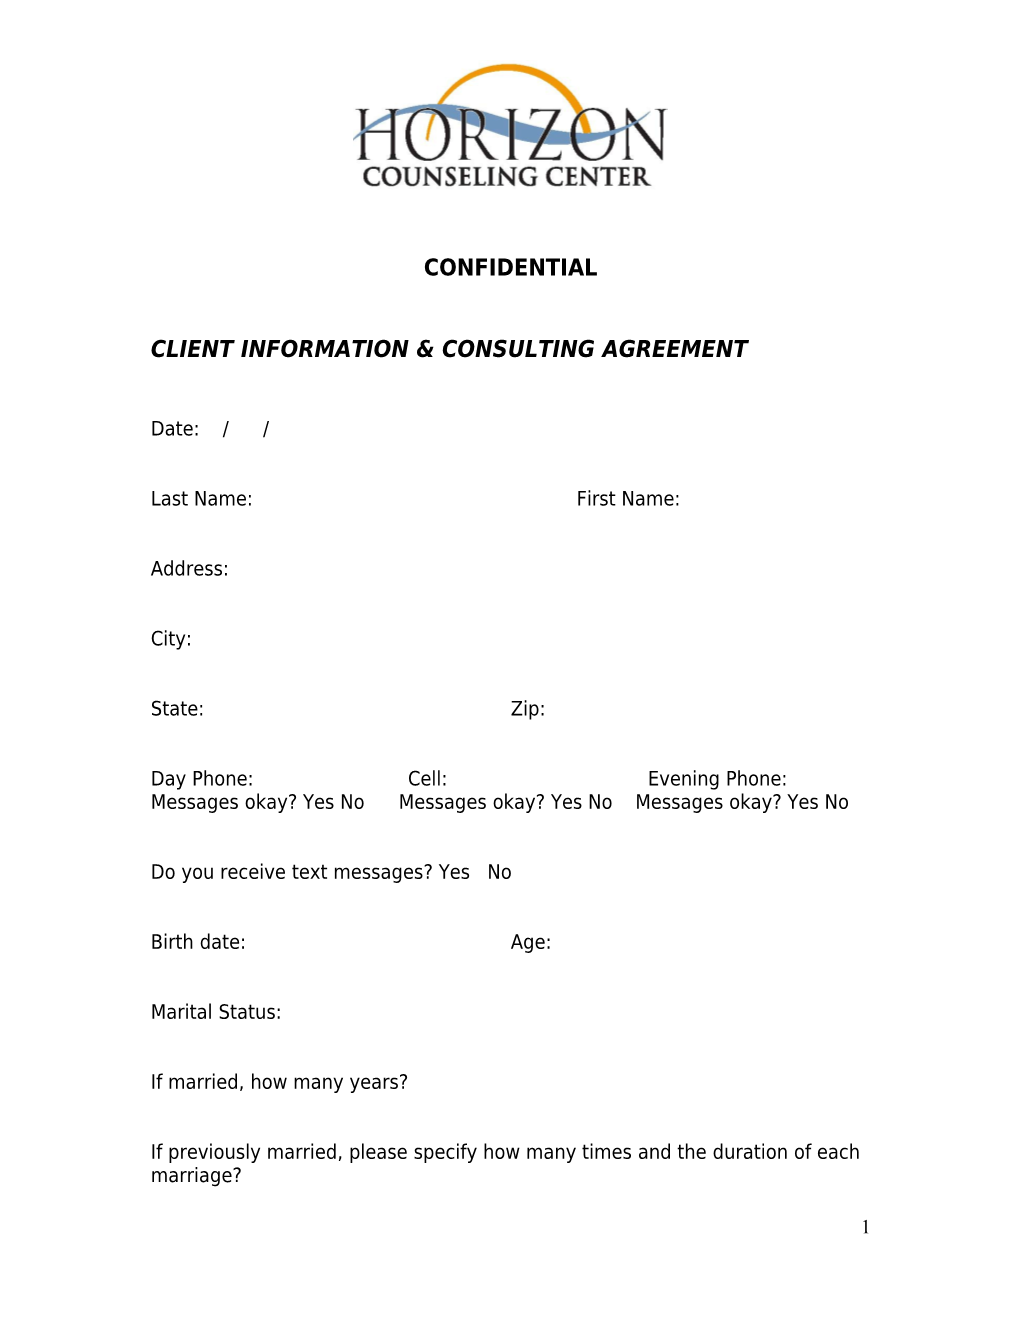 Client Information & Consulting Agreement